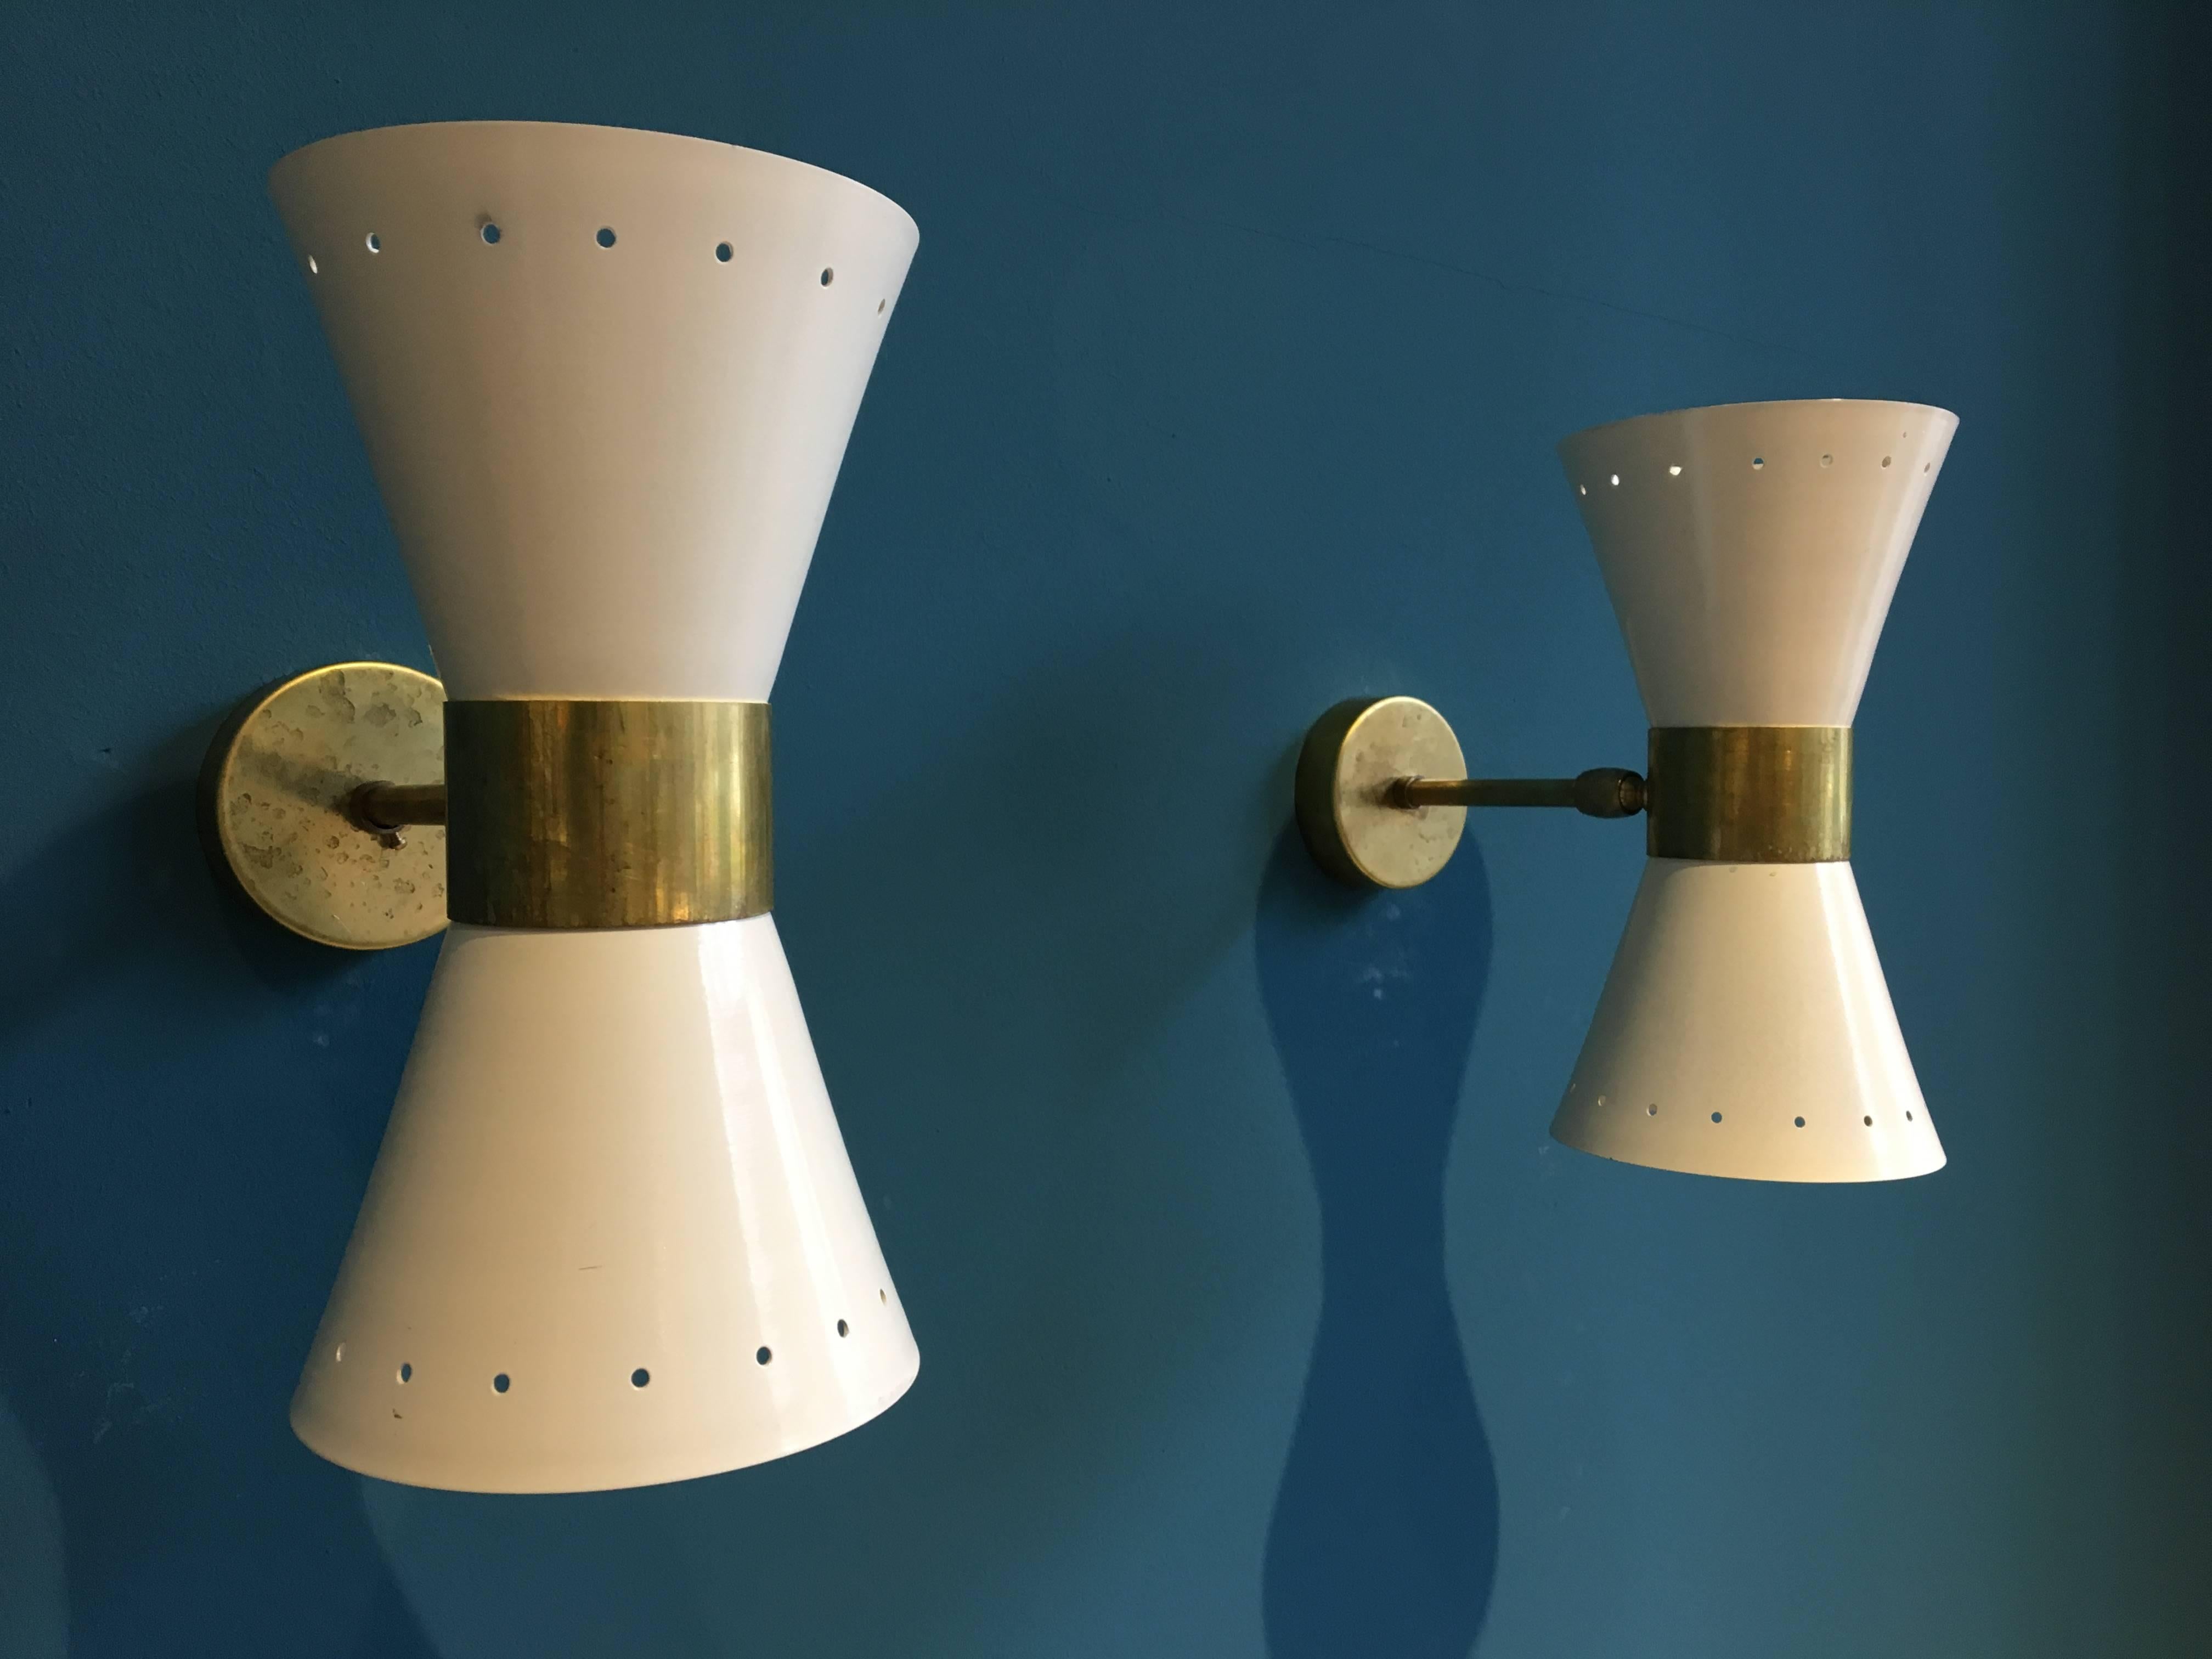 - Pair of Italian sconces with brass elements
- Fully adjustable and rotatable
- Each light uses two E14 bulbs
- This allows it to light in both directions, up and down
- It is possible to use only one bulb at a time
- No dents, rewired, and ready